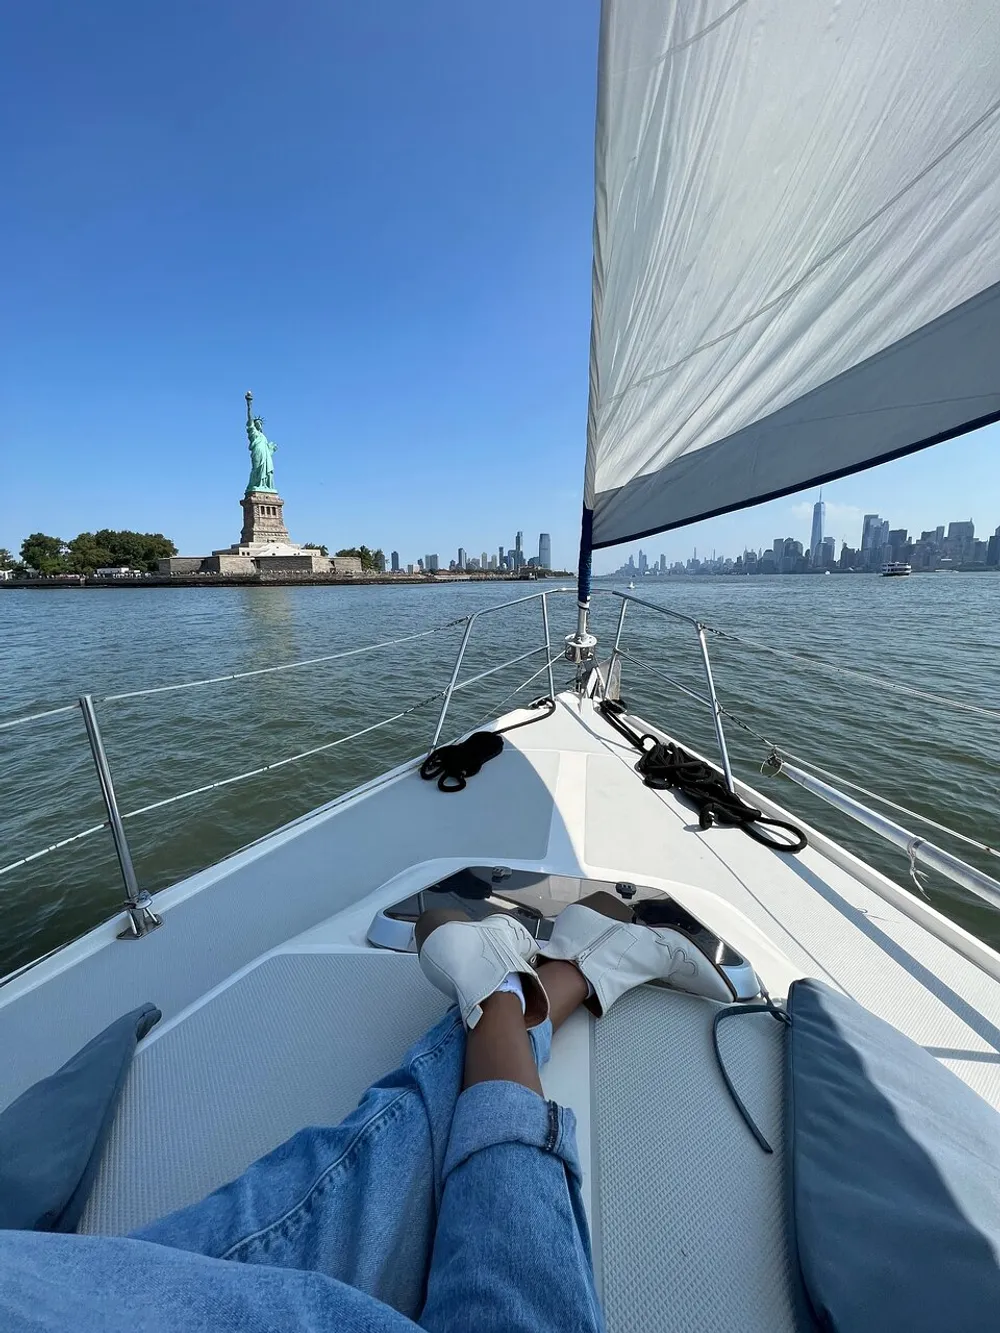 A person is relaxing on a sailboat with their feet up enjoying a clear day with a view of the Statue of Liberty and the New York City skyline in the background